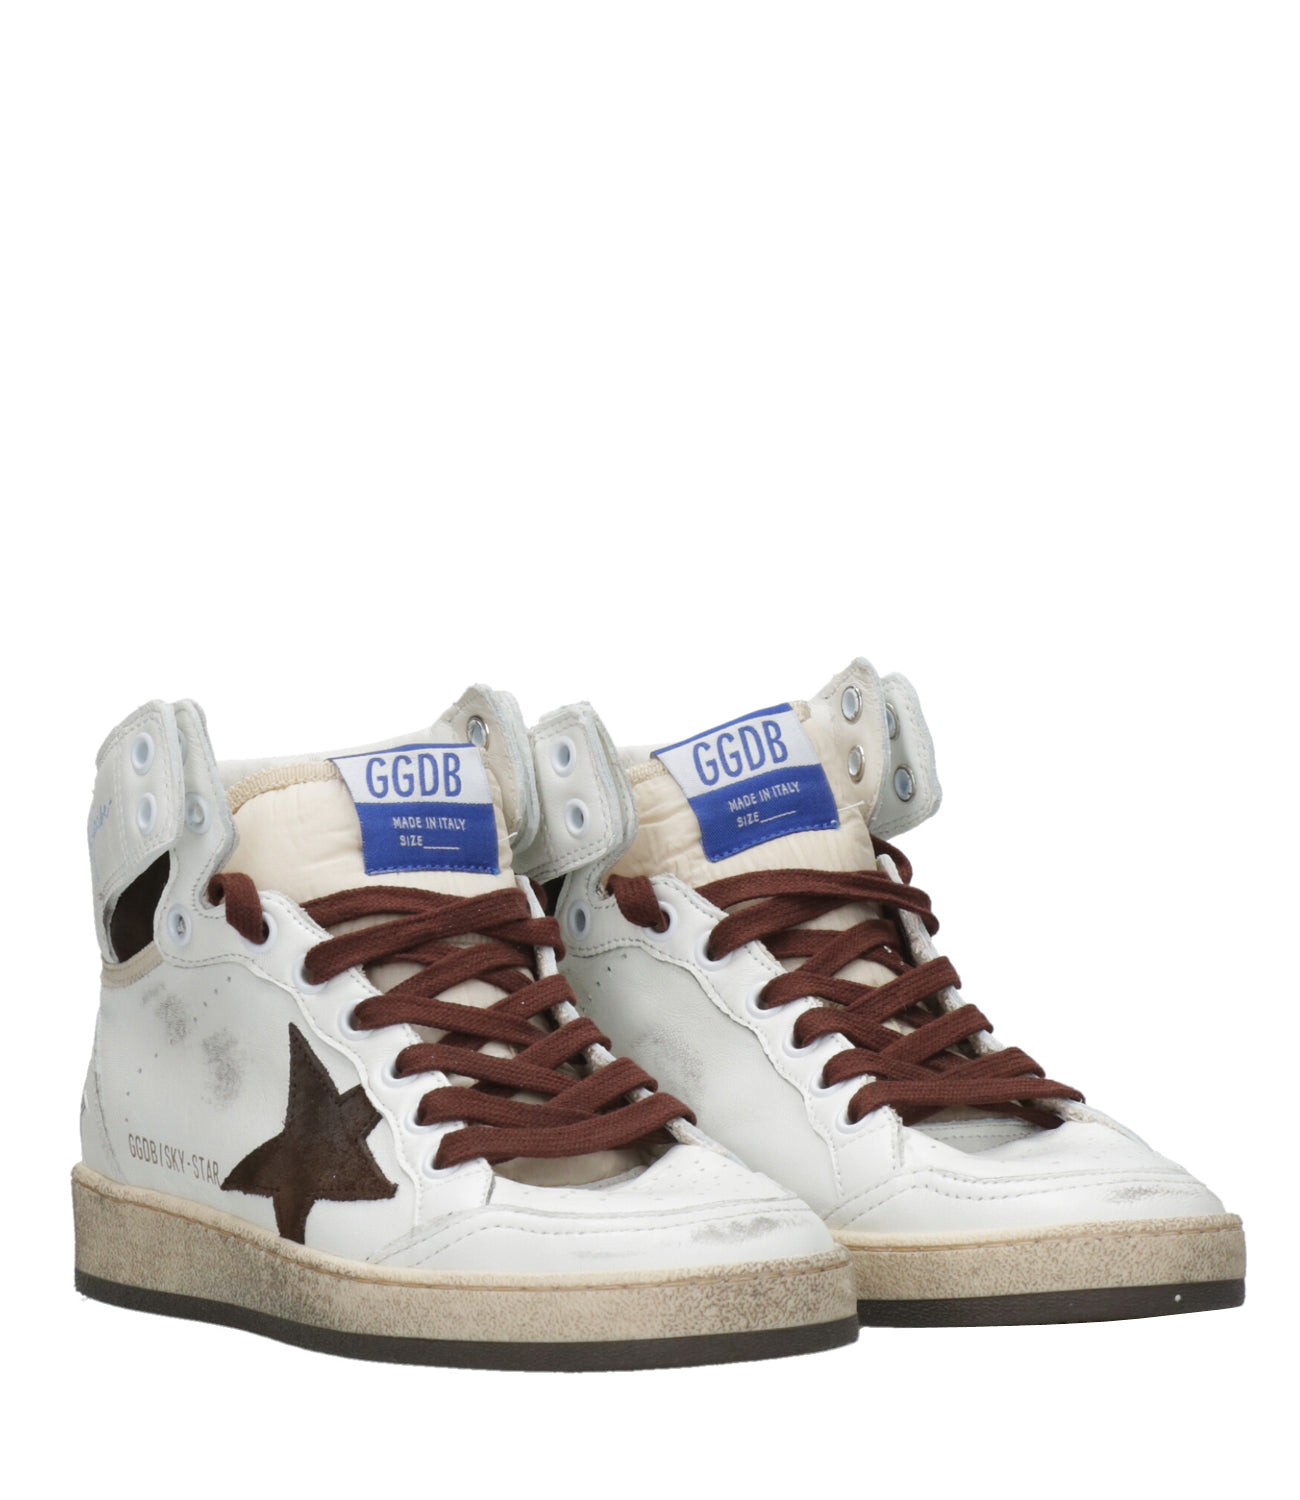 Golden Goose | Sky Star High Sneakers White, Beige and Brown